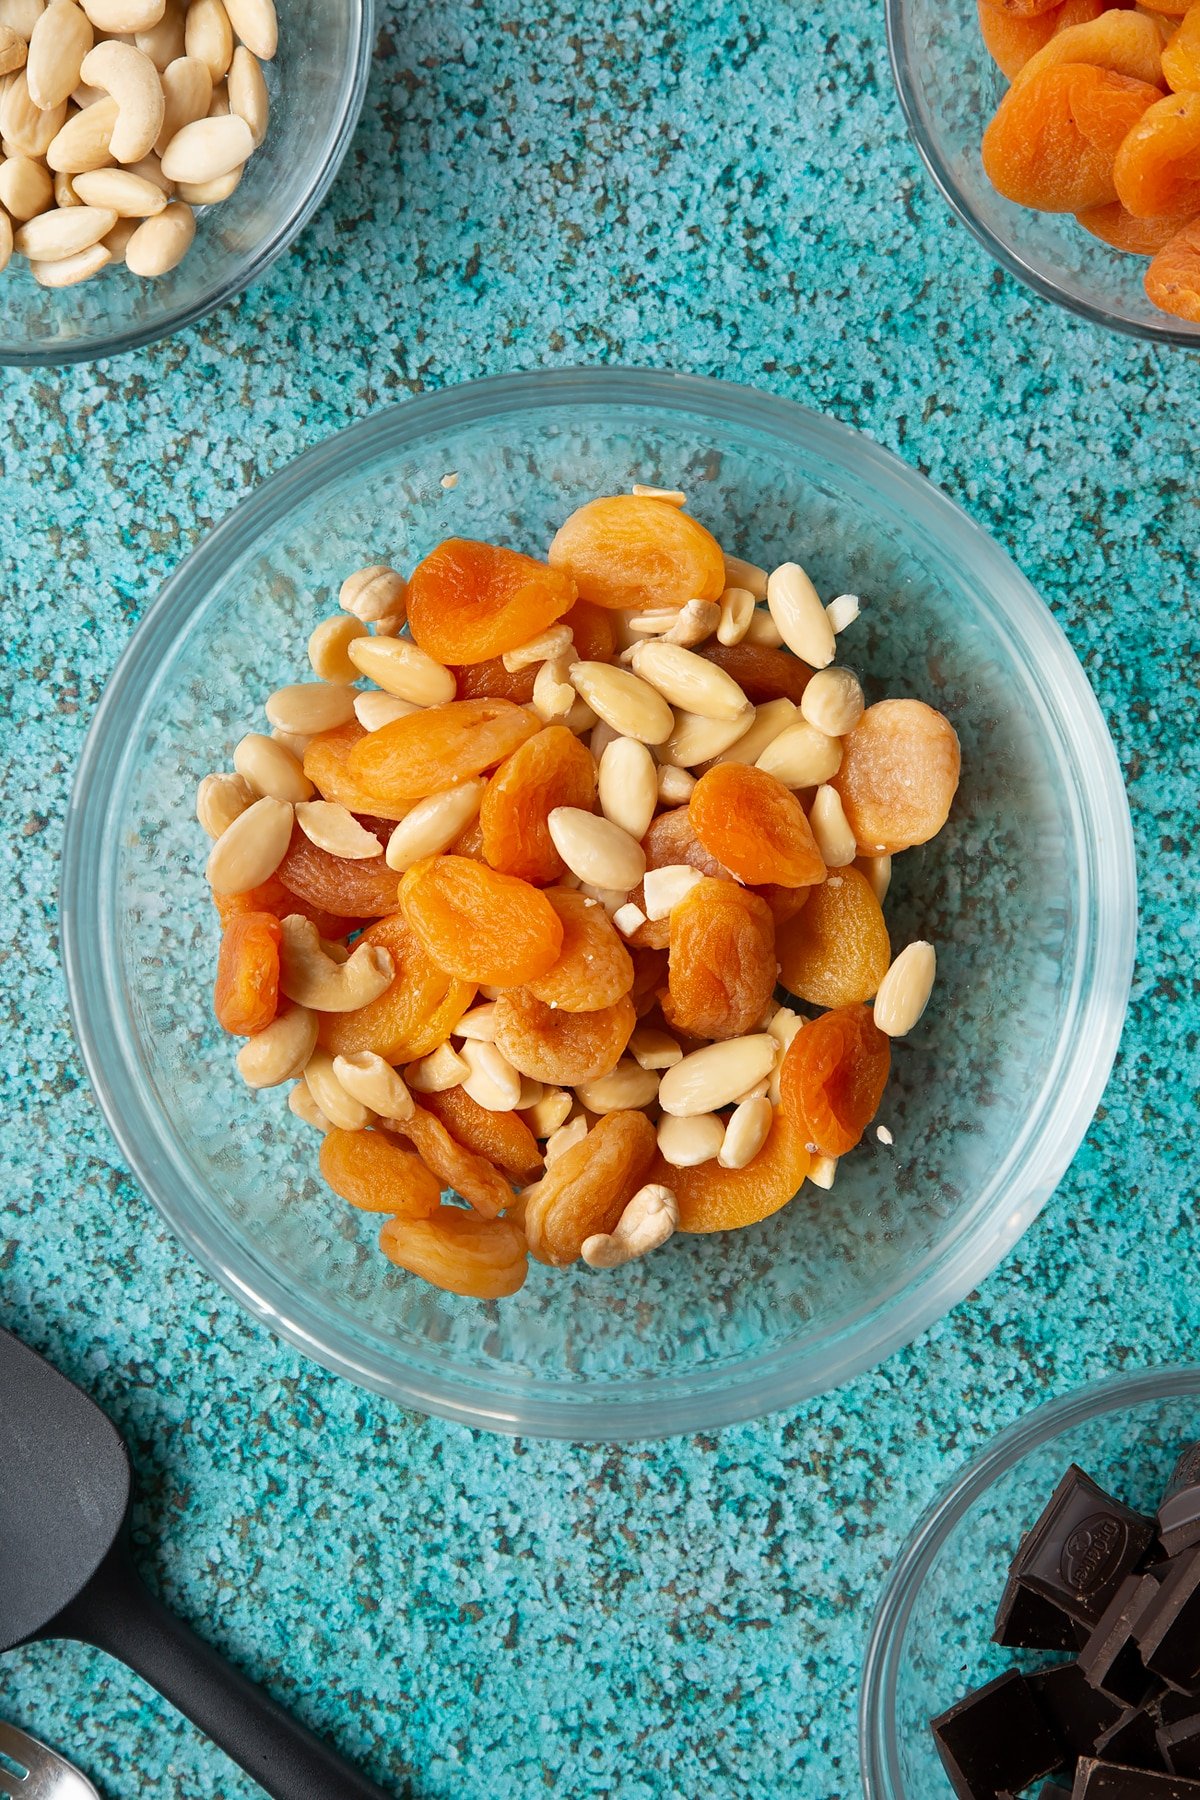 A mixing bowl containing soaked blanched almonds, apricots and a few cashews. Ingredients to make chocolate apricot balls surround the ball.